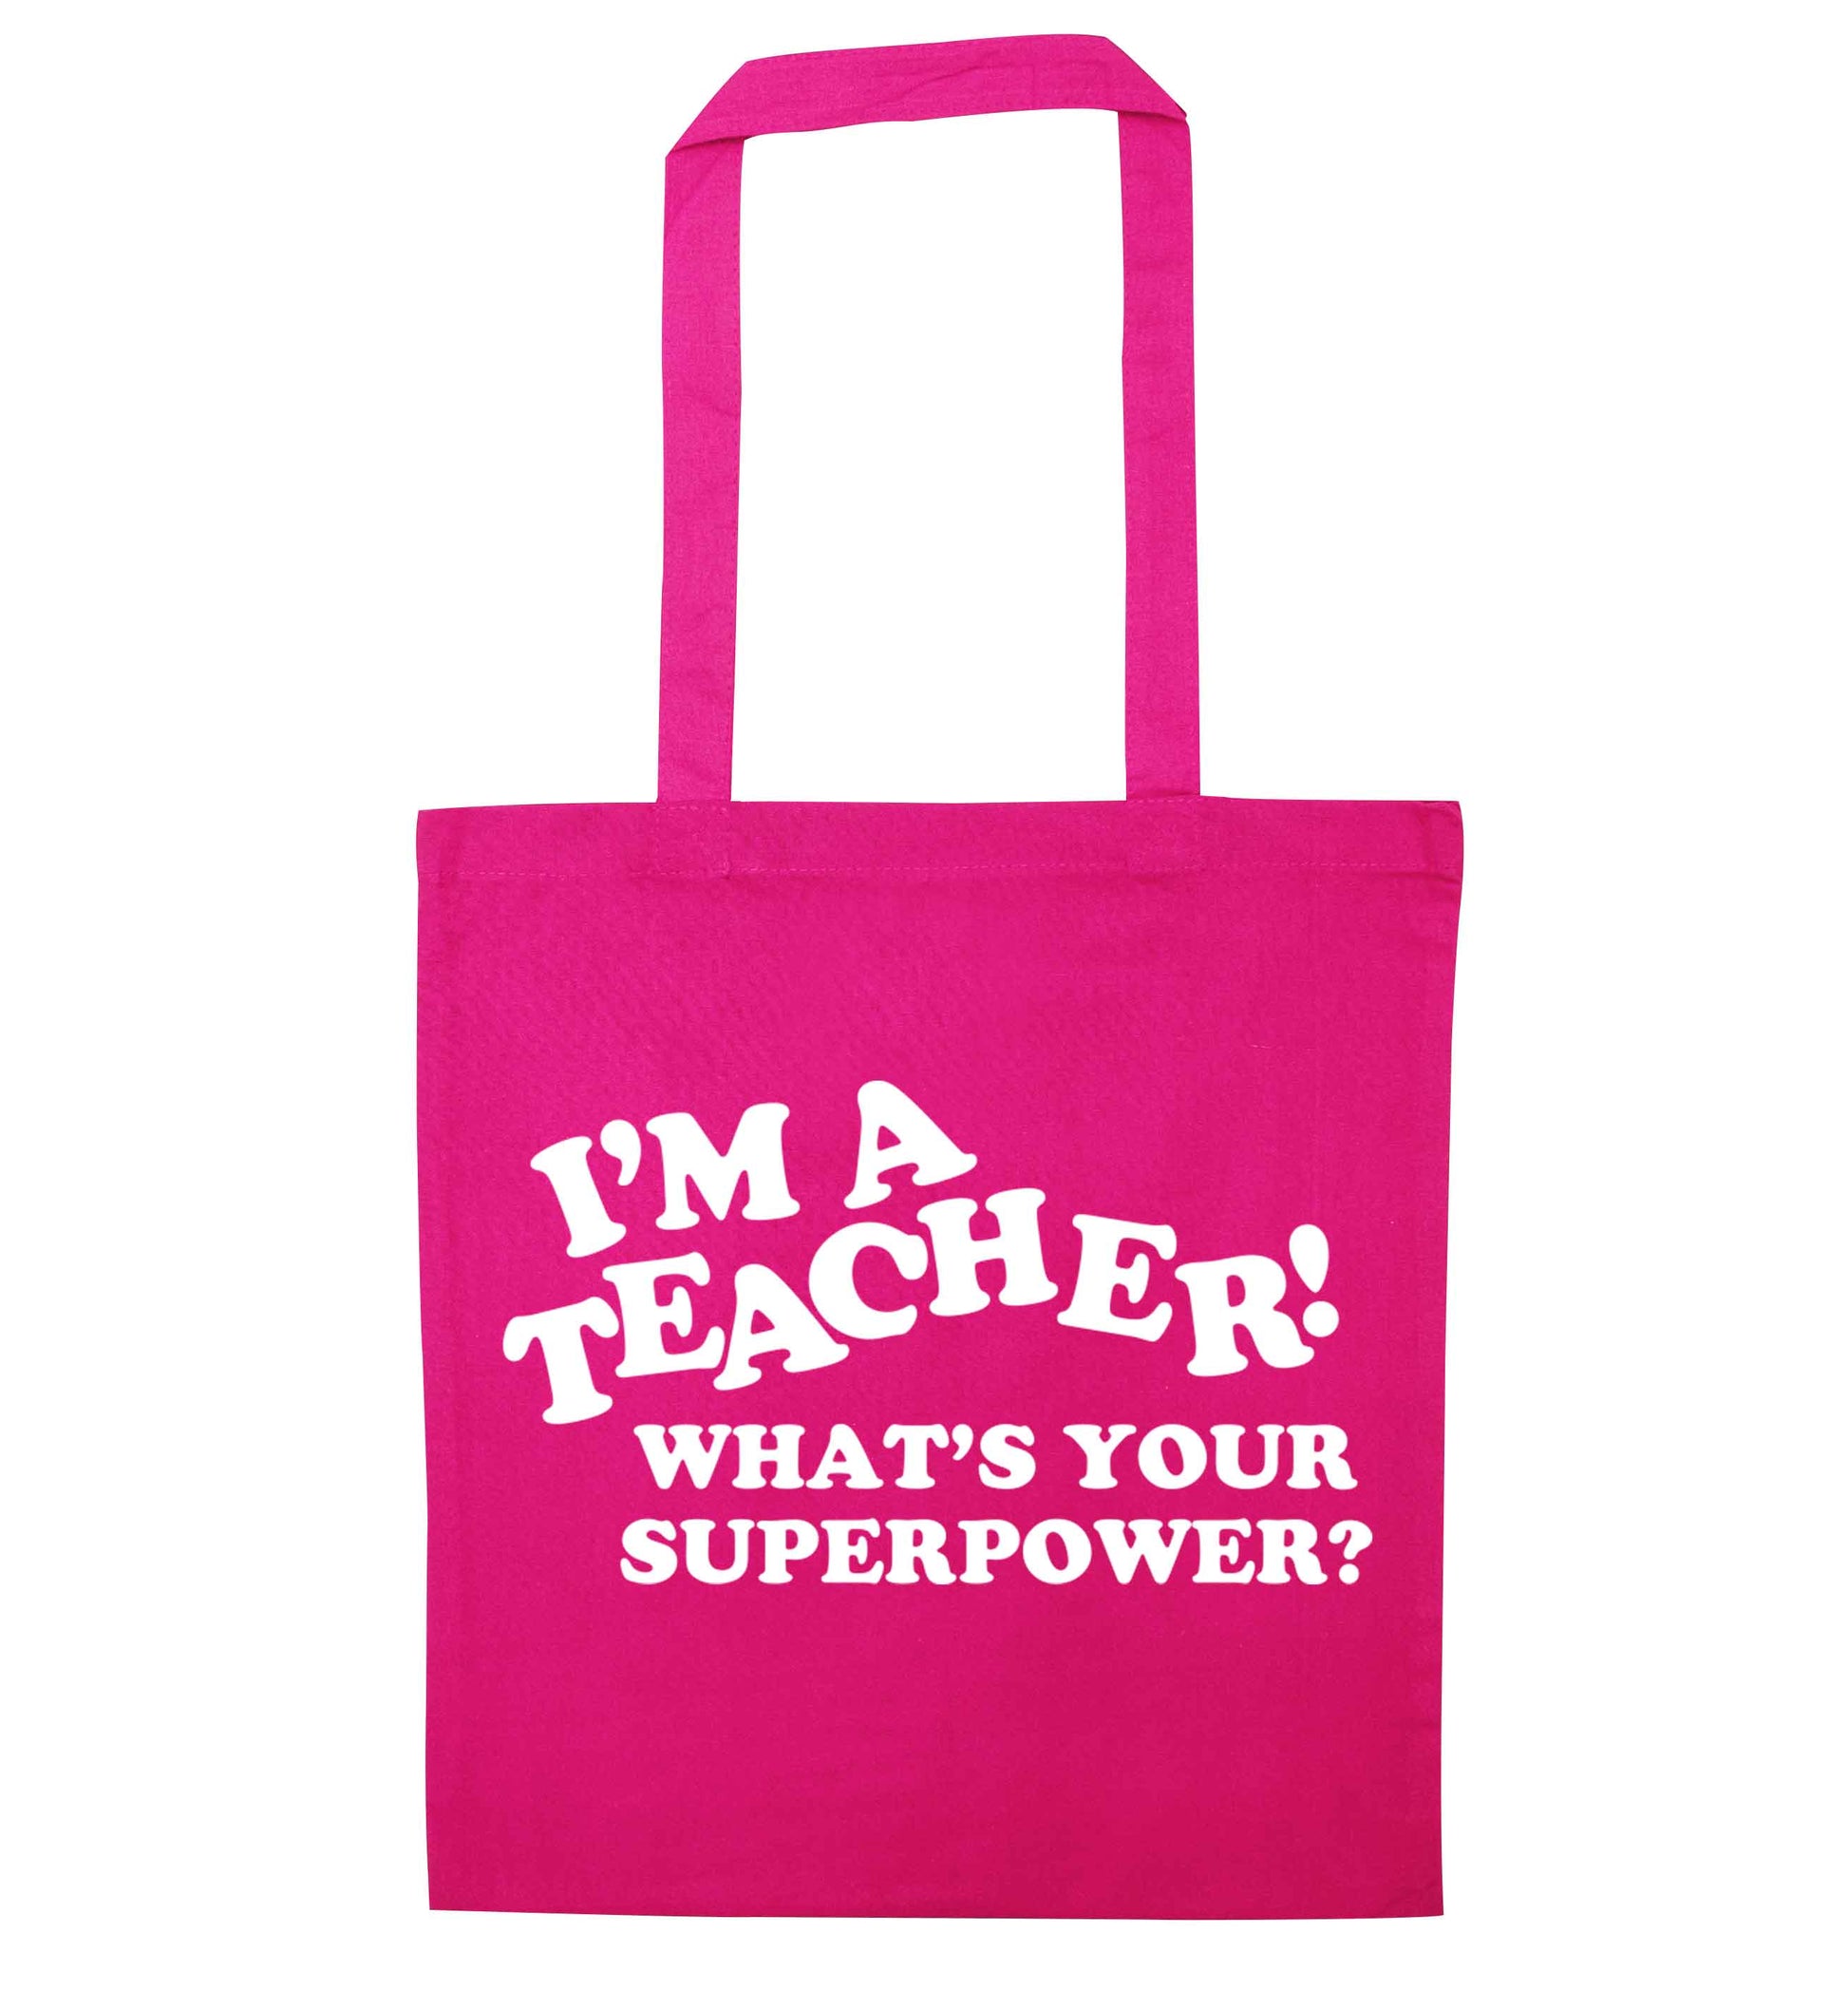 I'm a teacher what's your superpower?! pink tote bag